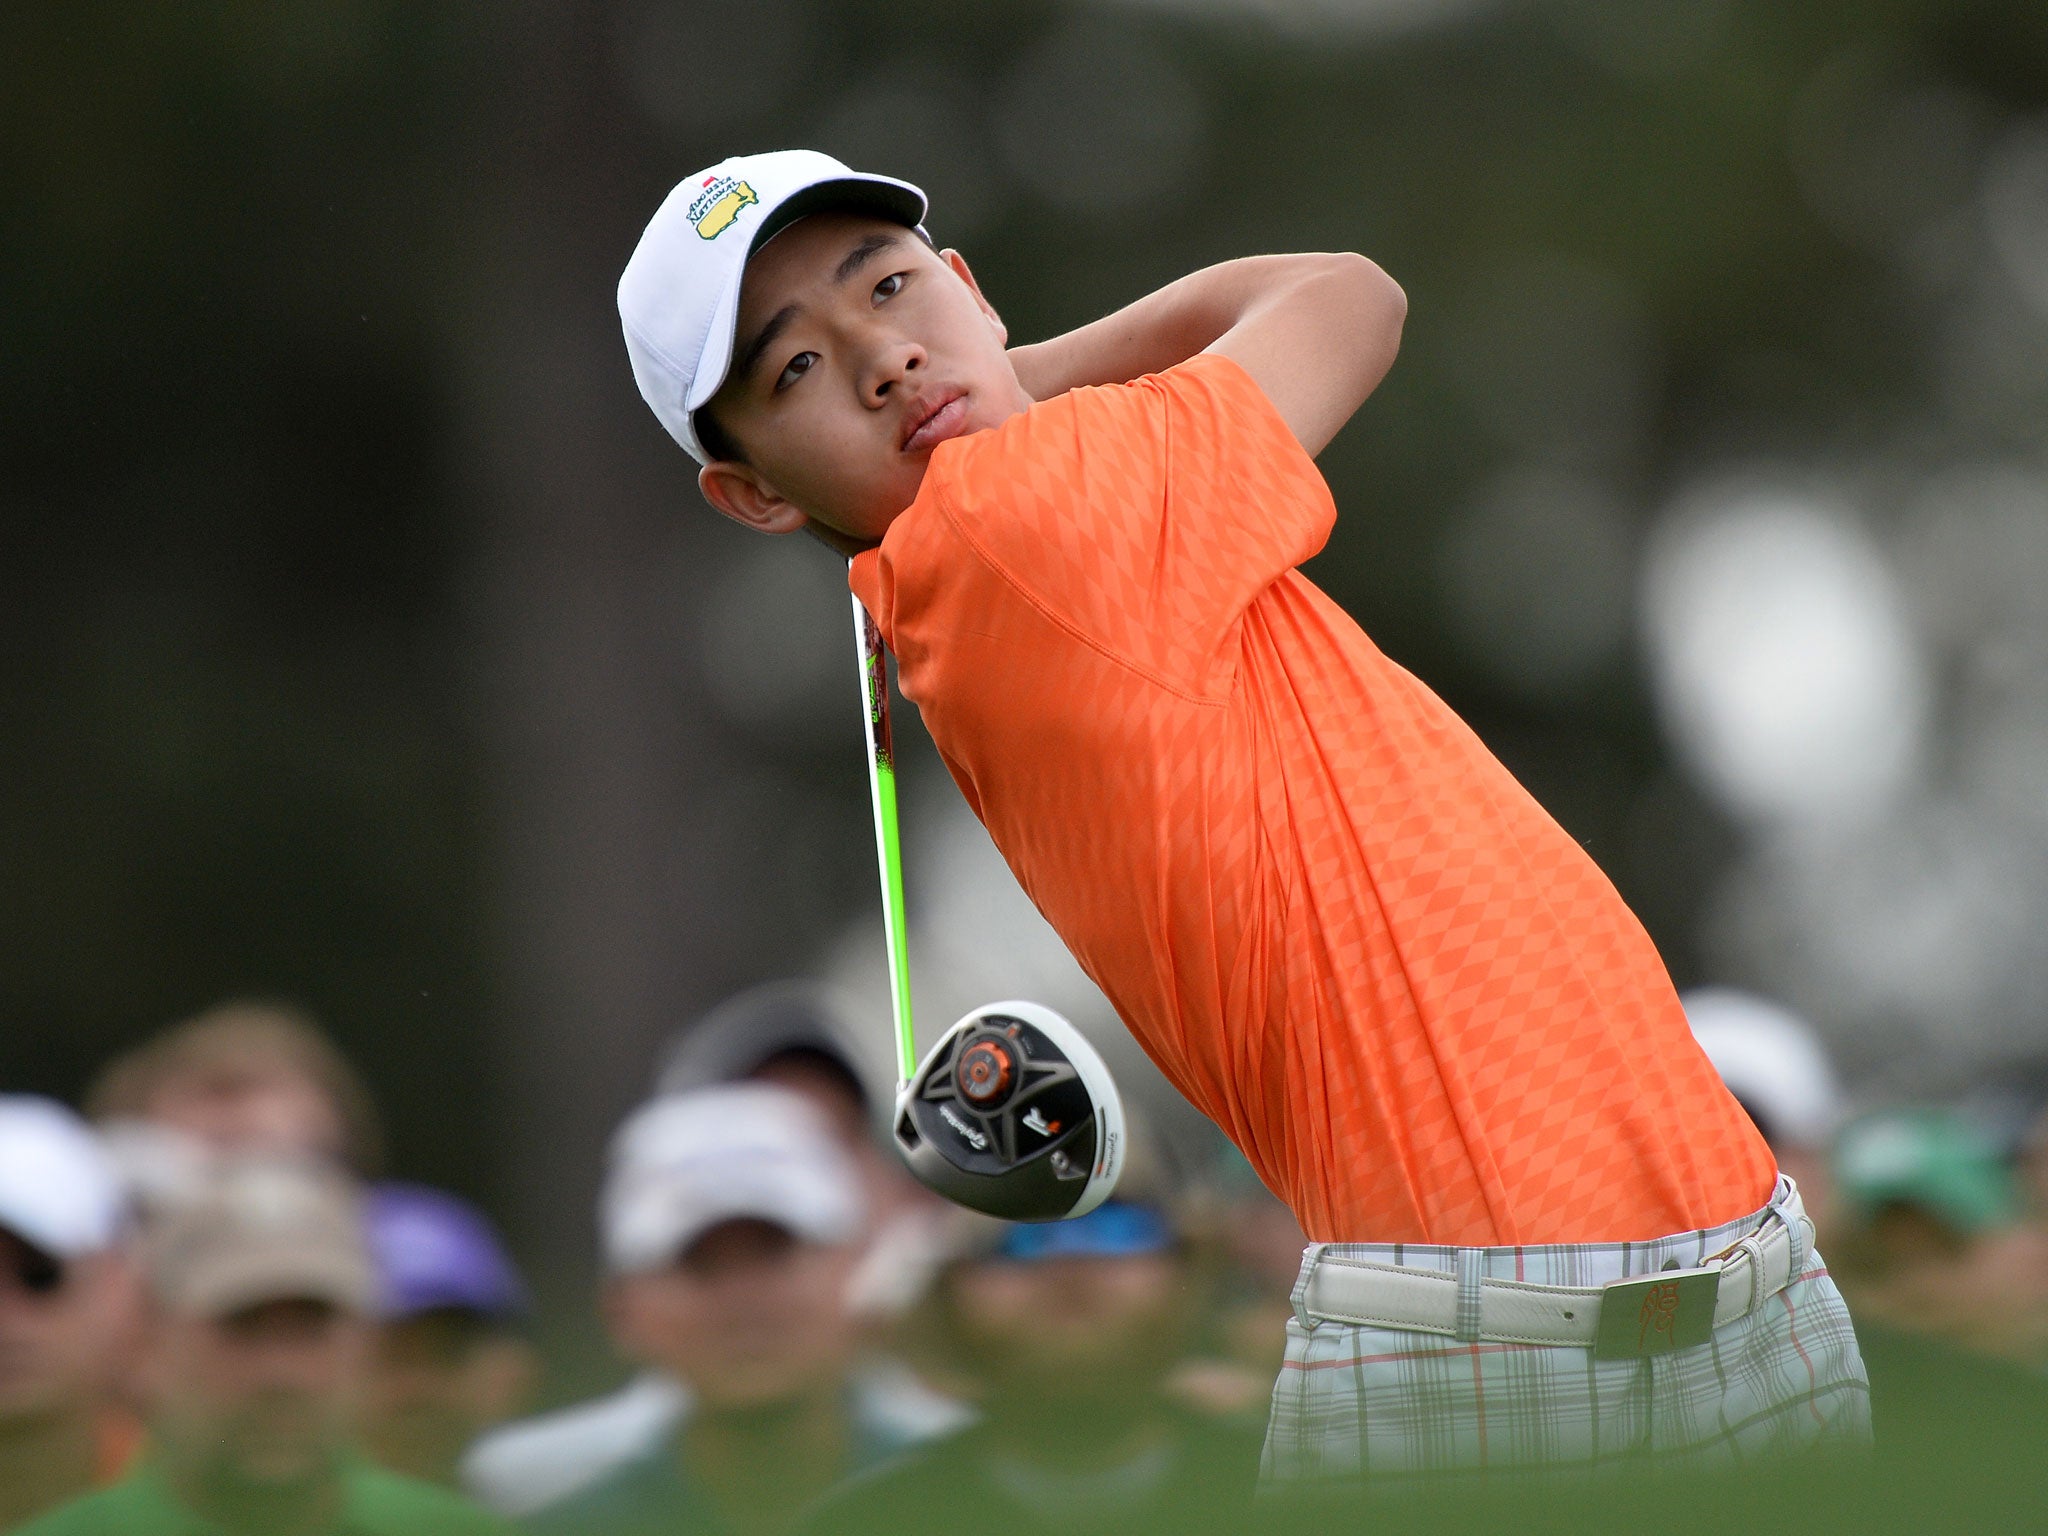 Even with 1stroke slow play penalty, 14yearold golfer Guan Tianlang